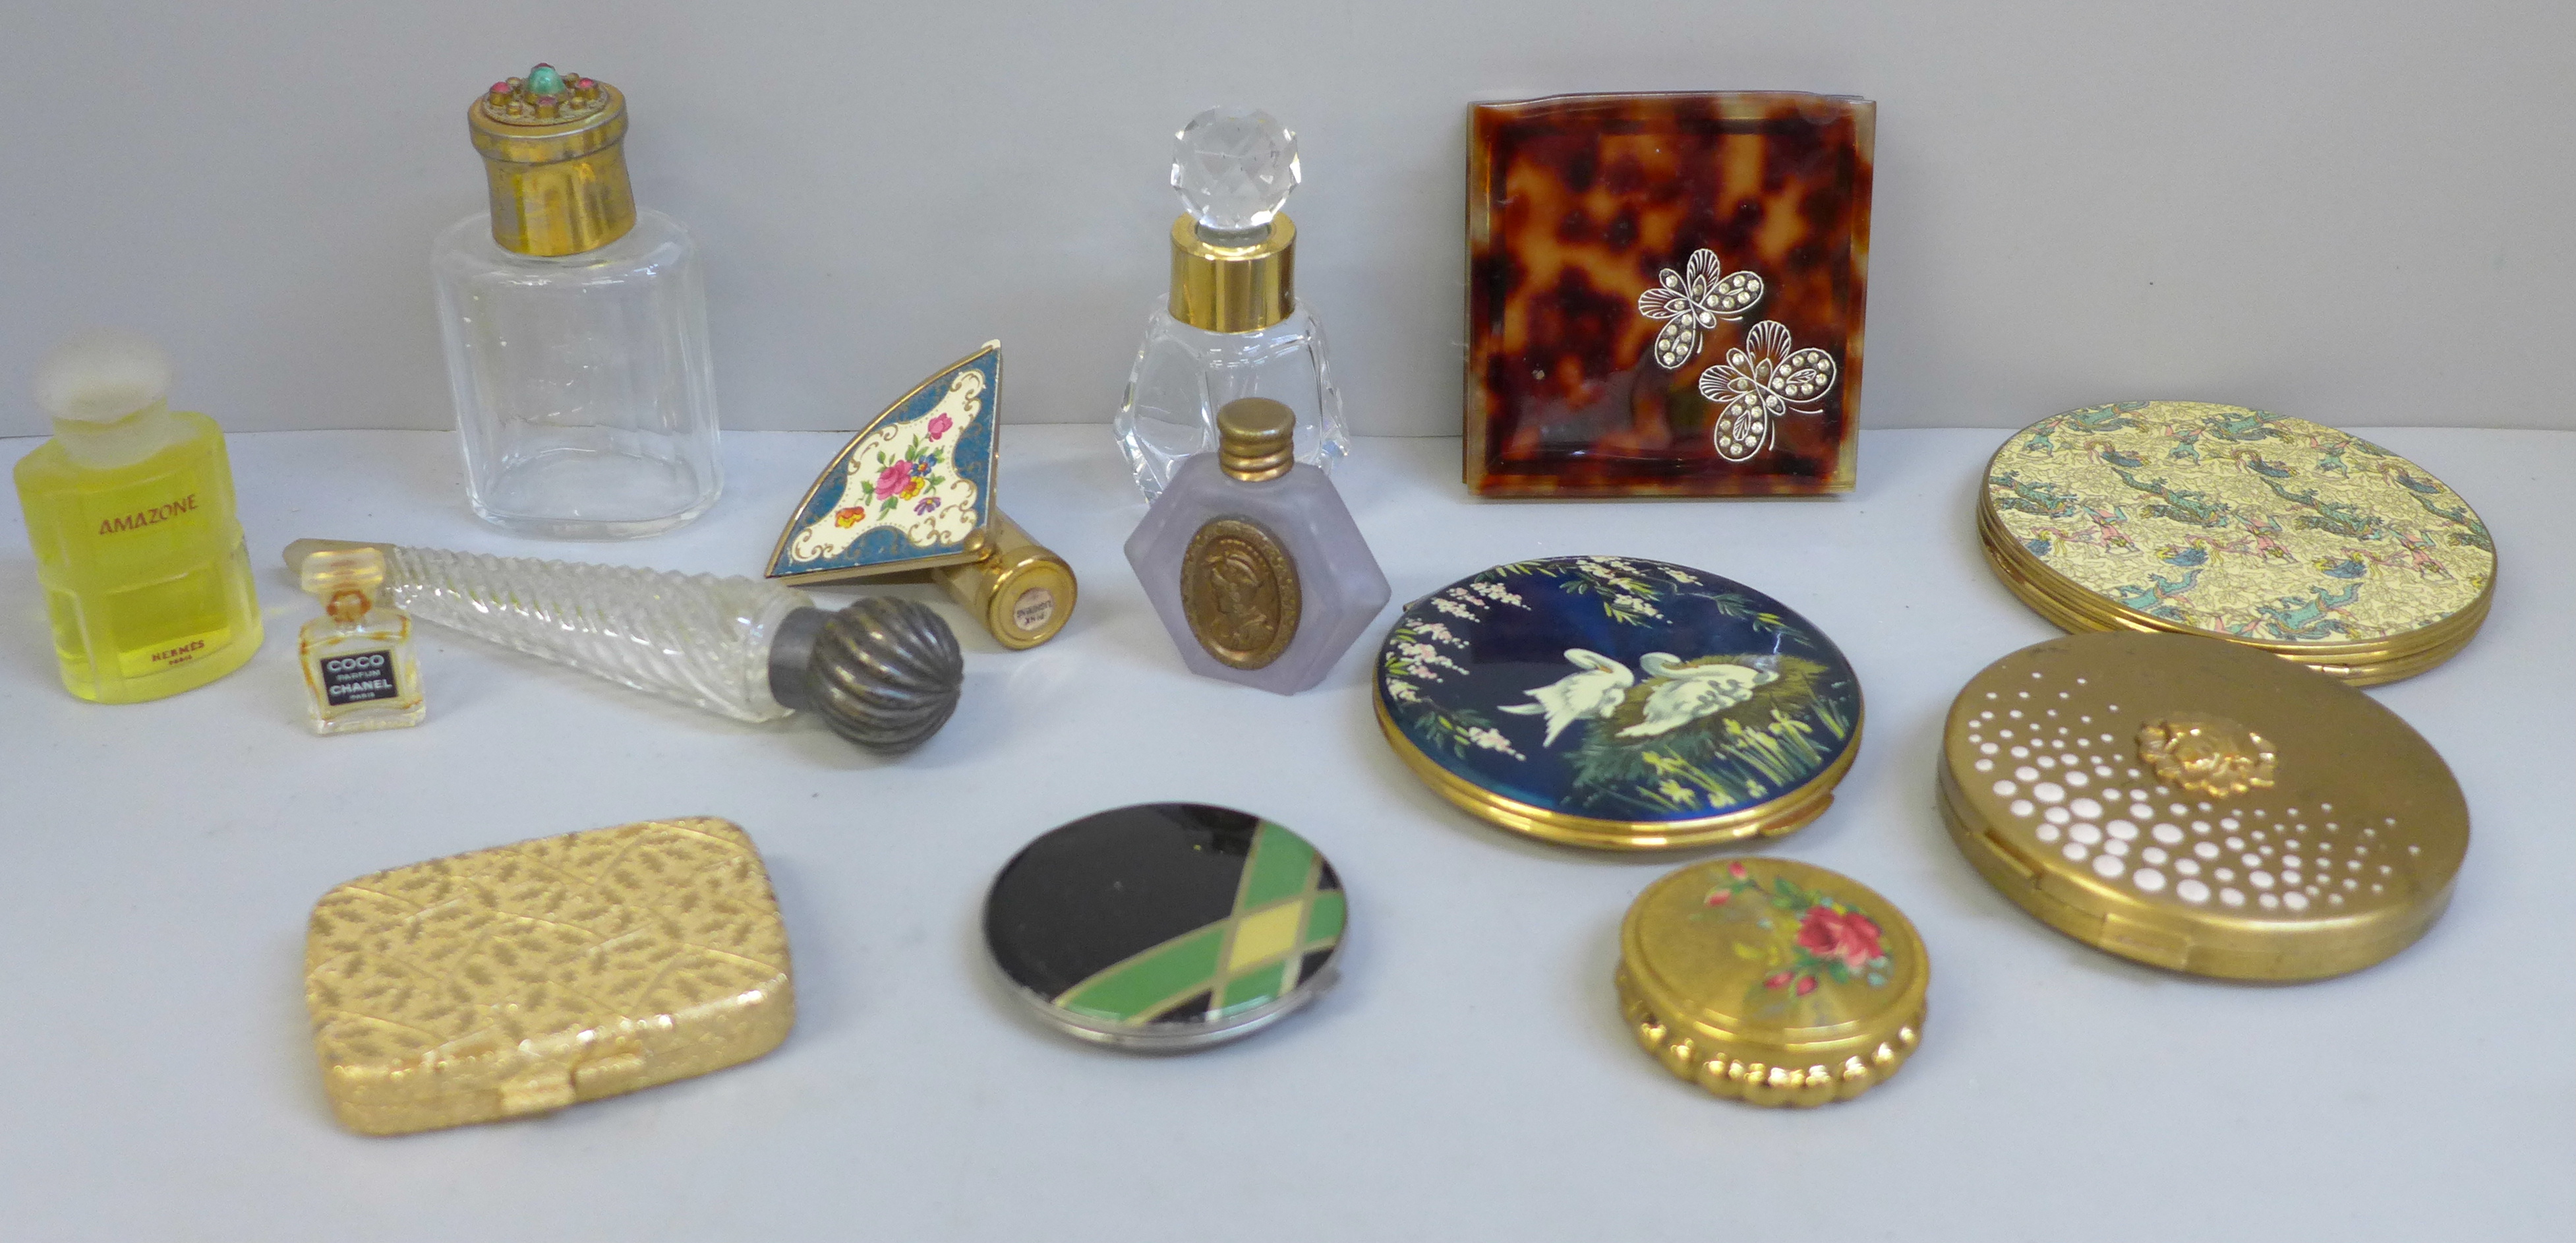 A collection of compacts and perfume bottles including Chanel No.5 miniatures